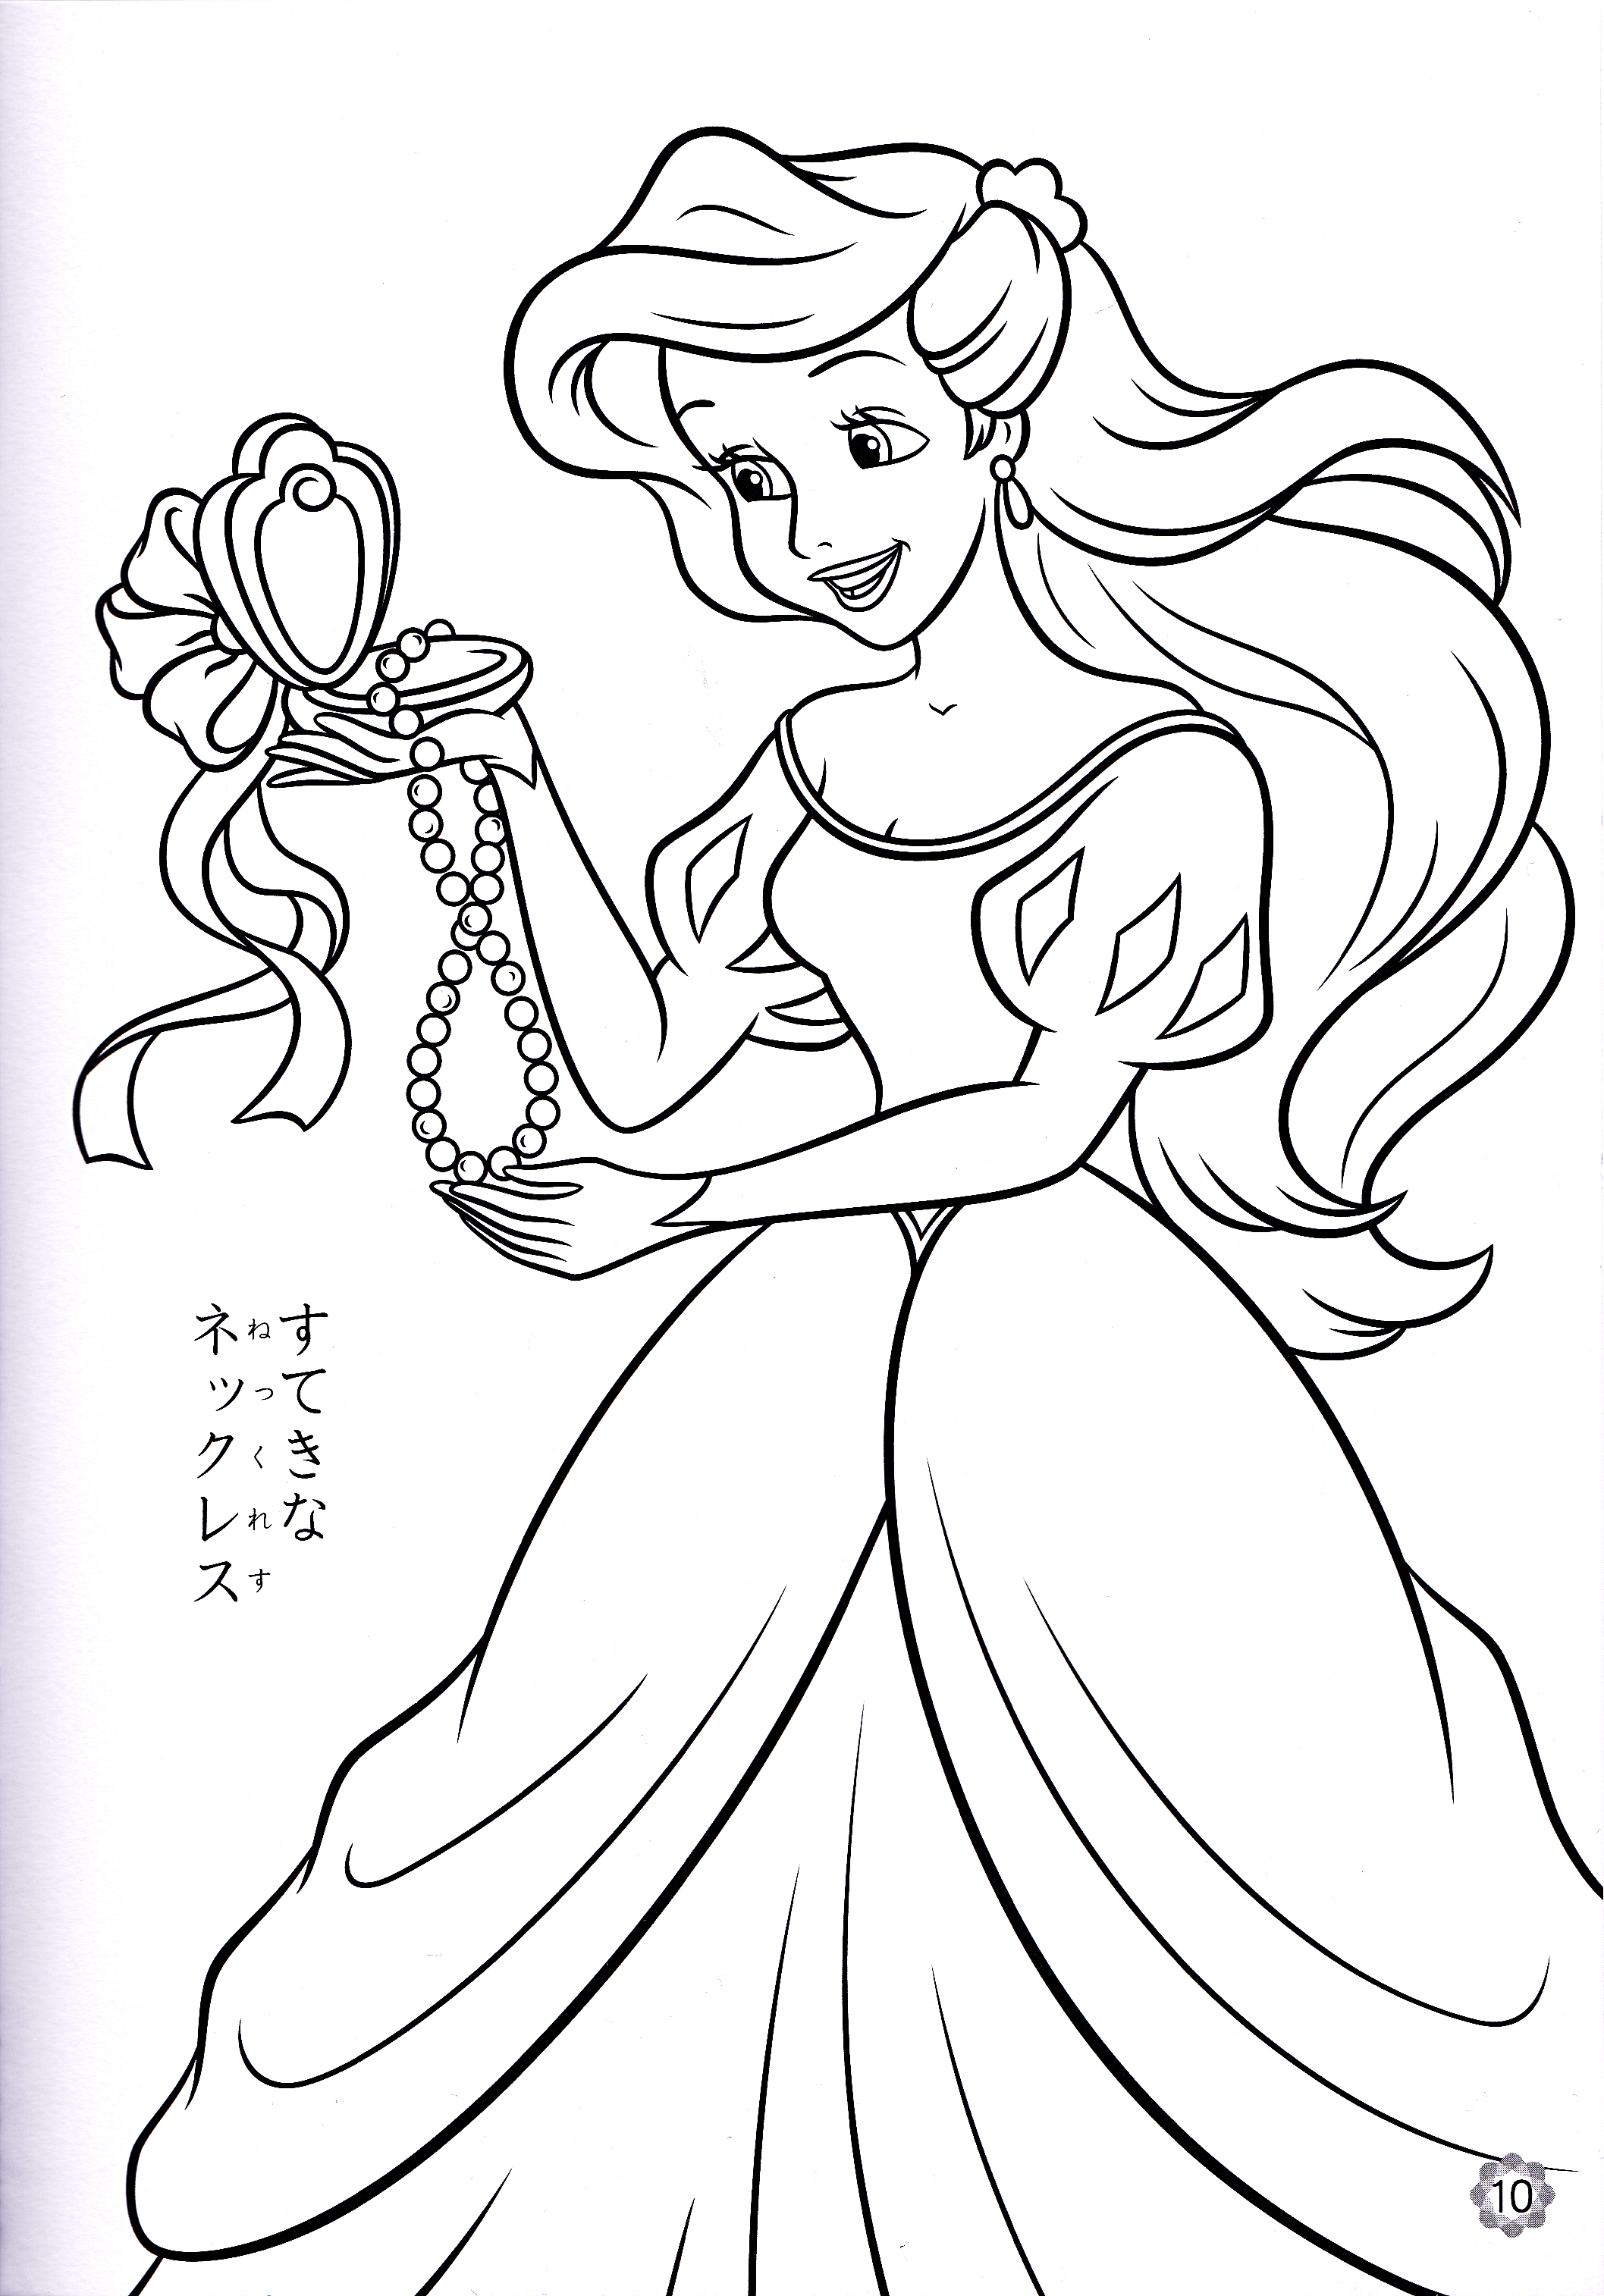 the-little-mermaid-coloring-page-colouring-book-pinterest